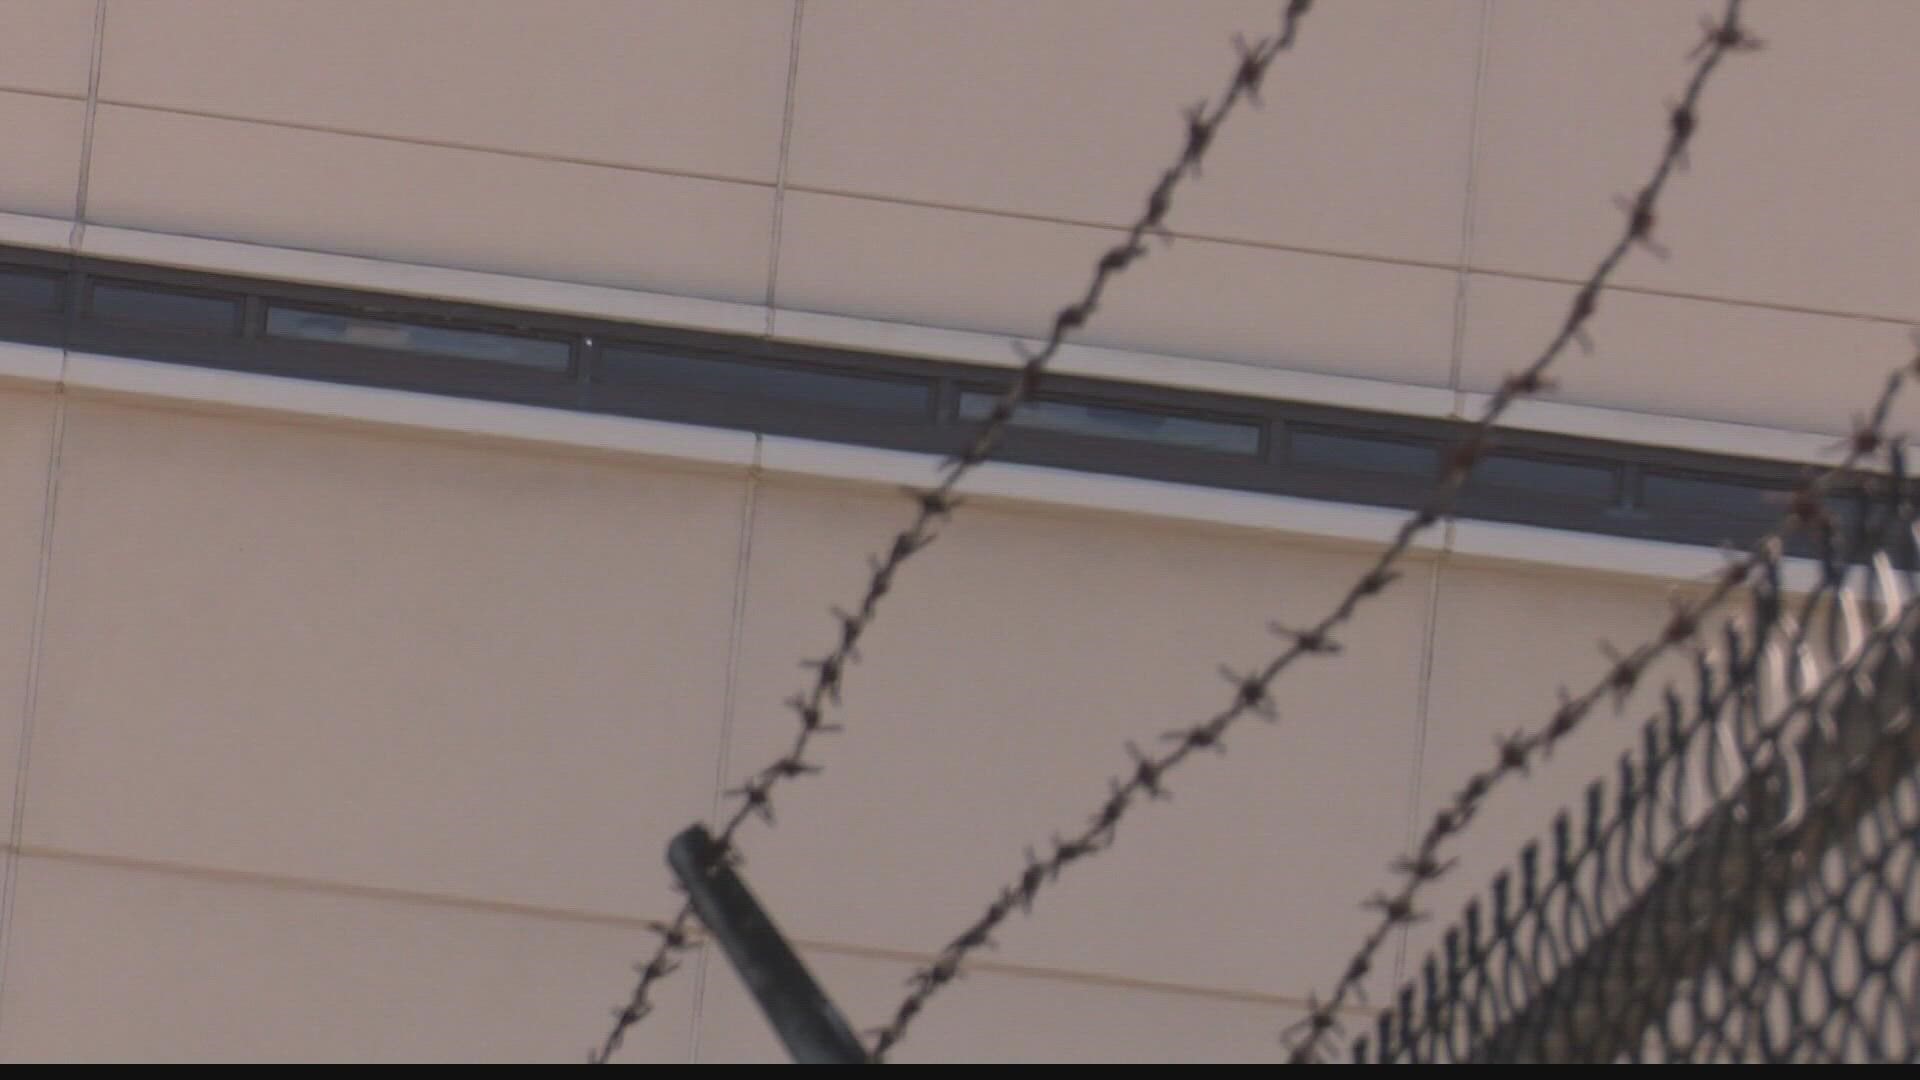 Zephyrhills Correctional Institution said they don't have people to approve all the new visitation lists.